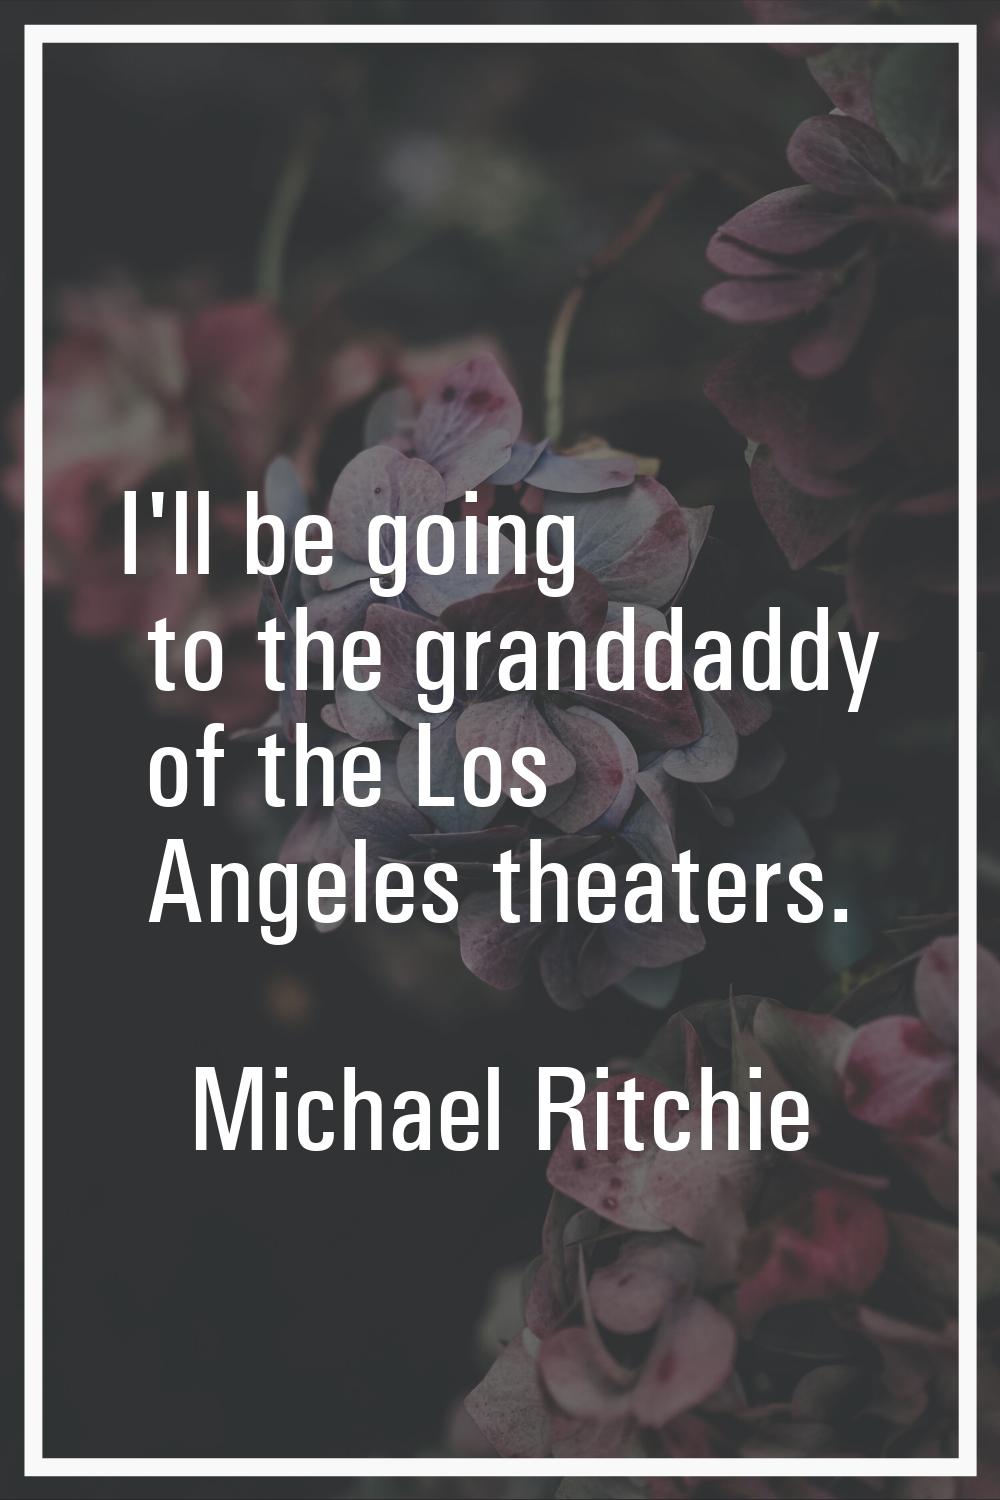 I'll be going to the granddaddy of the Los Angeles theaters.